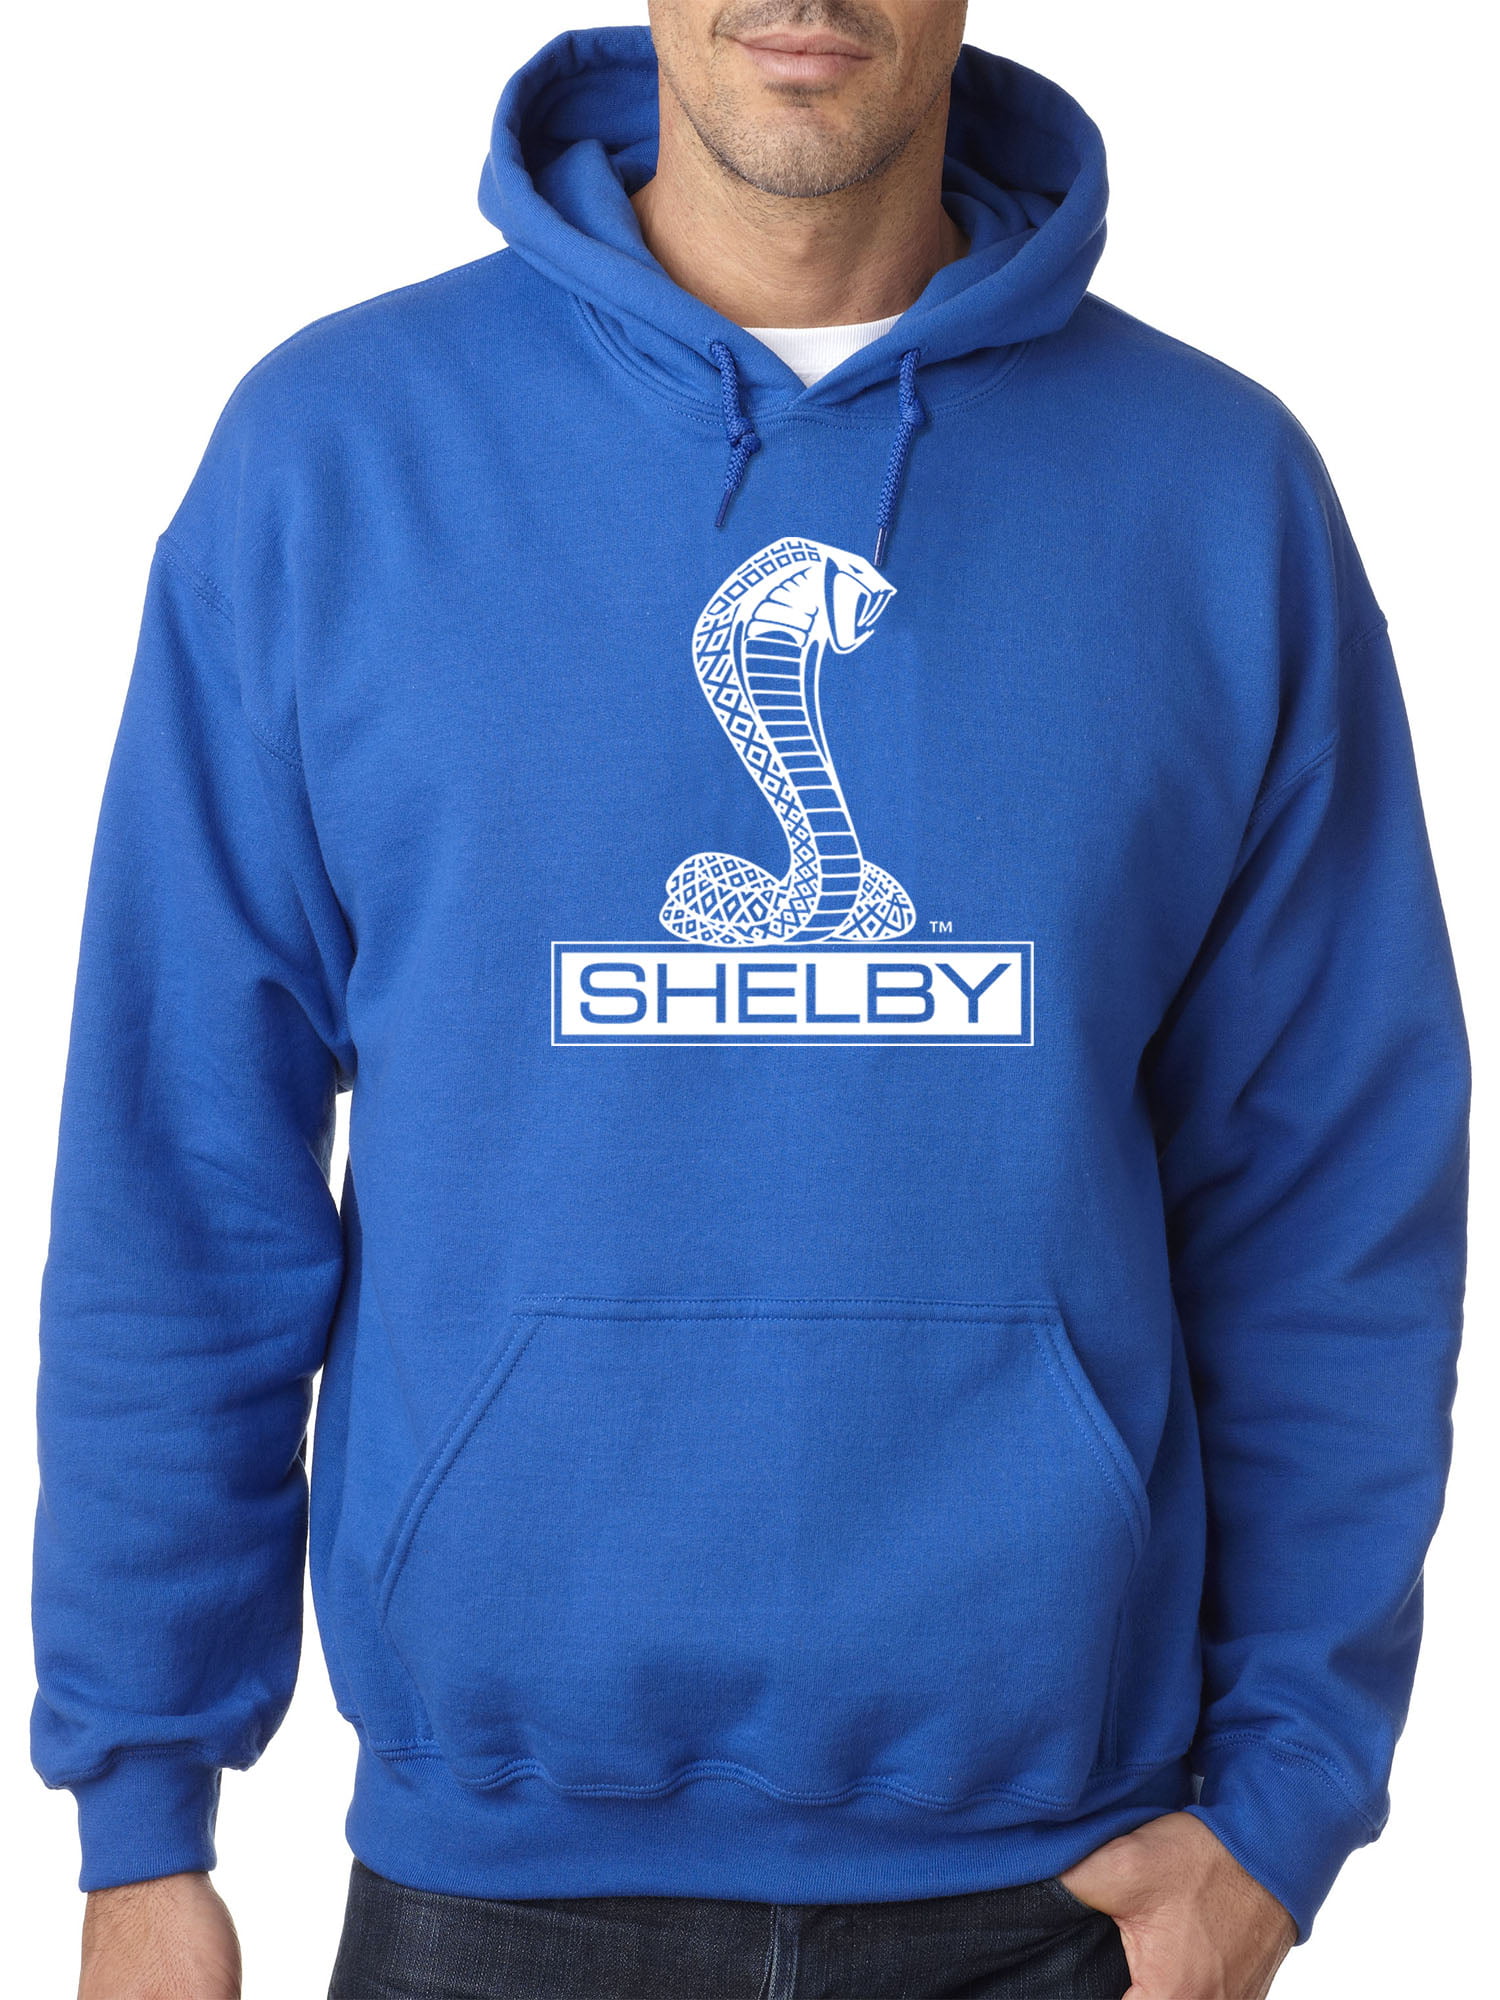 American Hotrod Mustang White Blue Shelby Cobra Graphic Hoodie for Men 